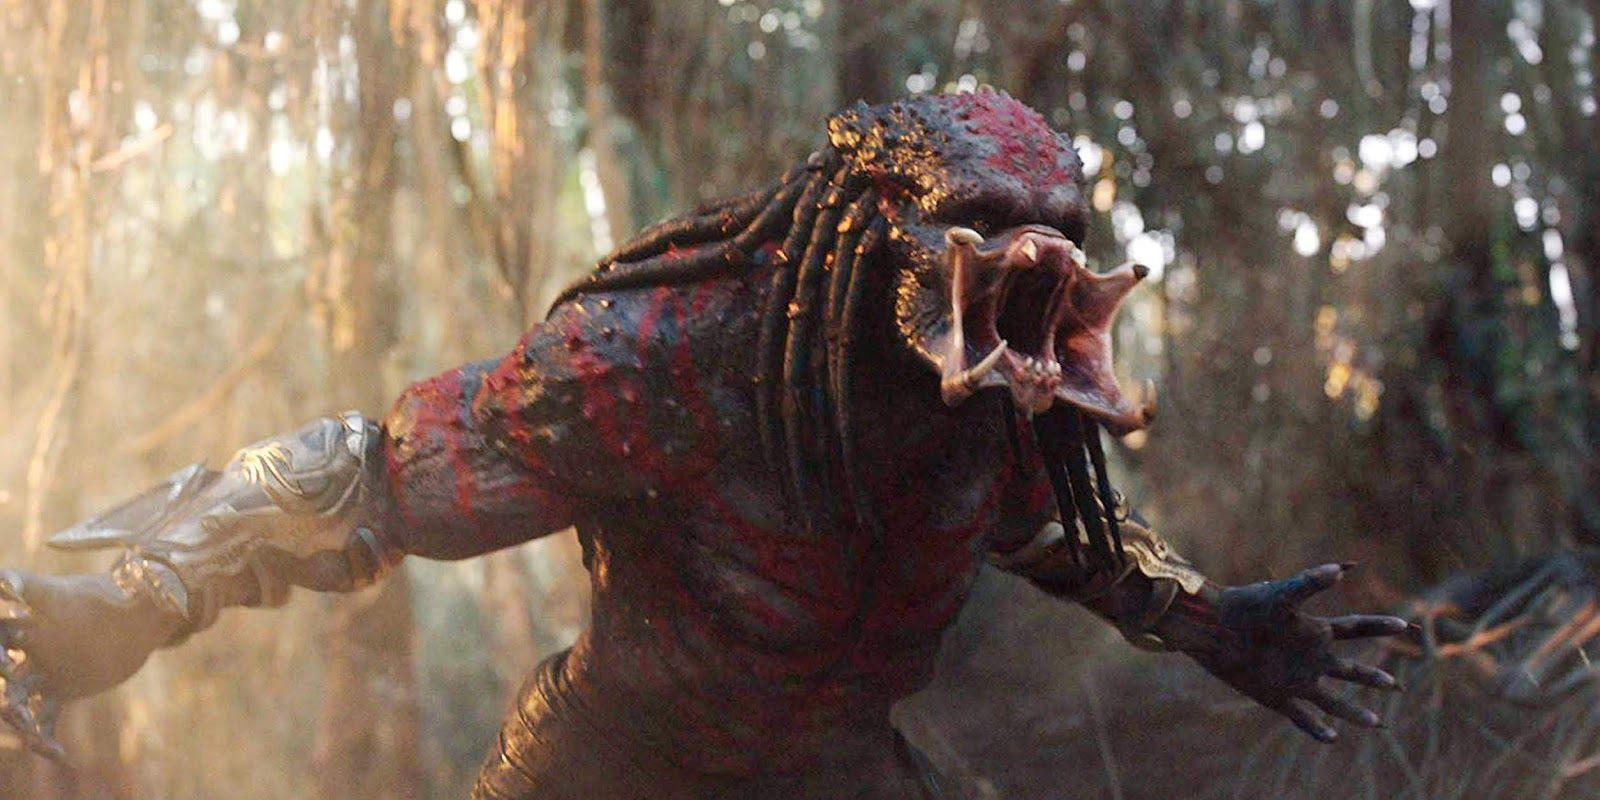 Which Horror Movie Monster Are You Based On Your Zodiac?